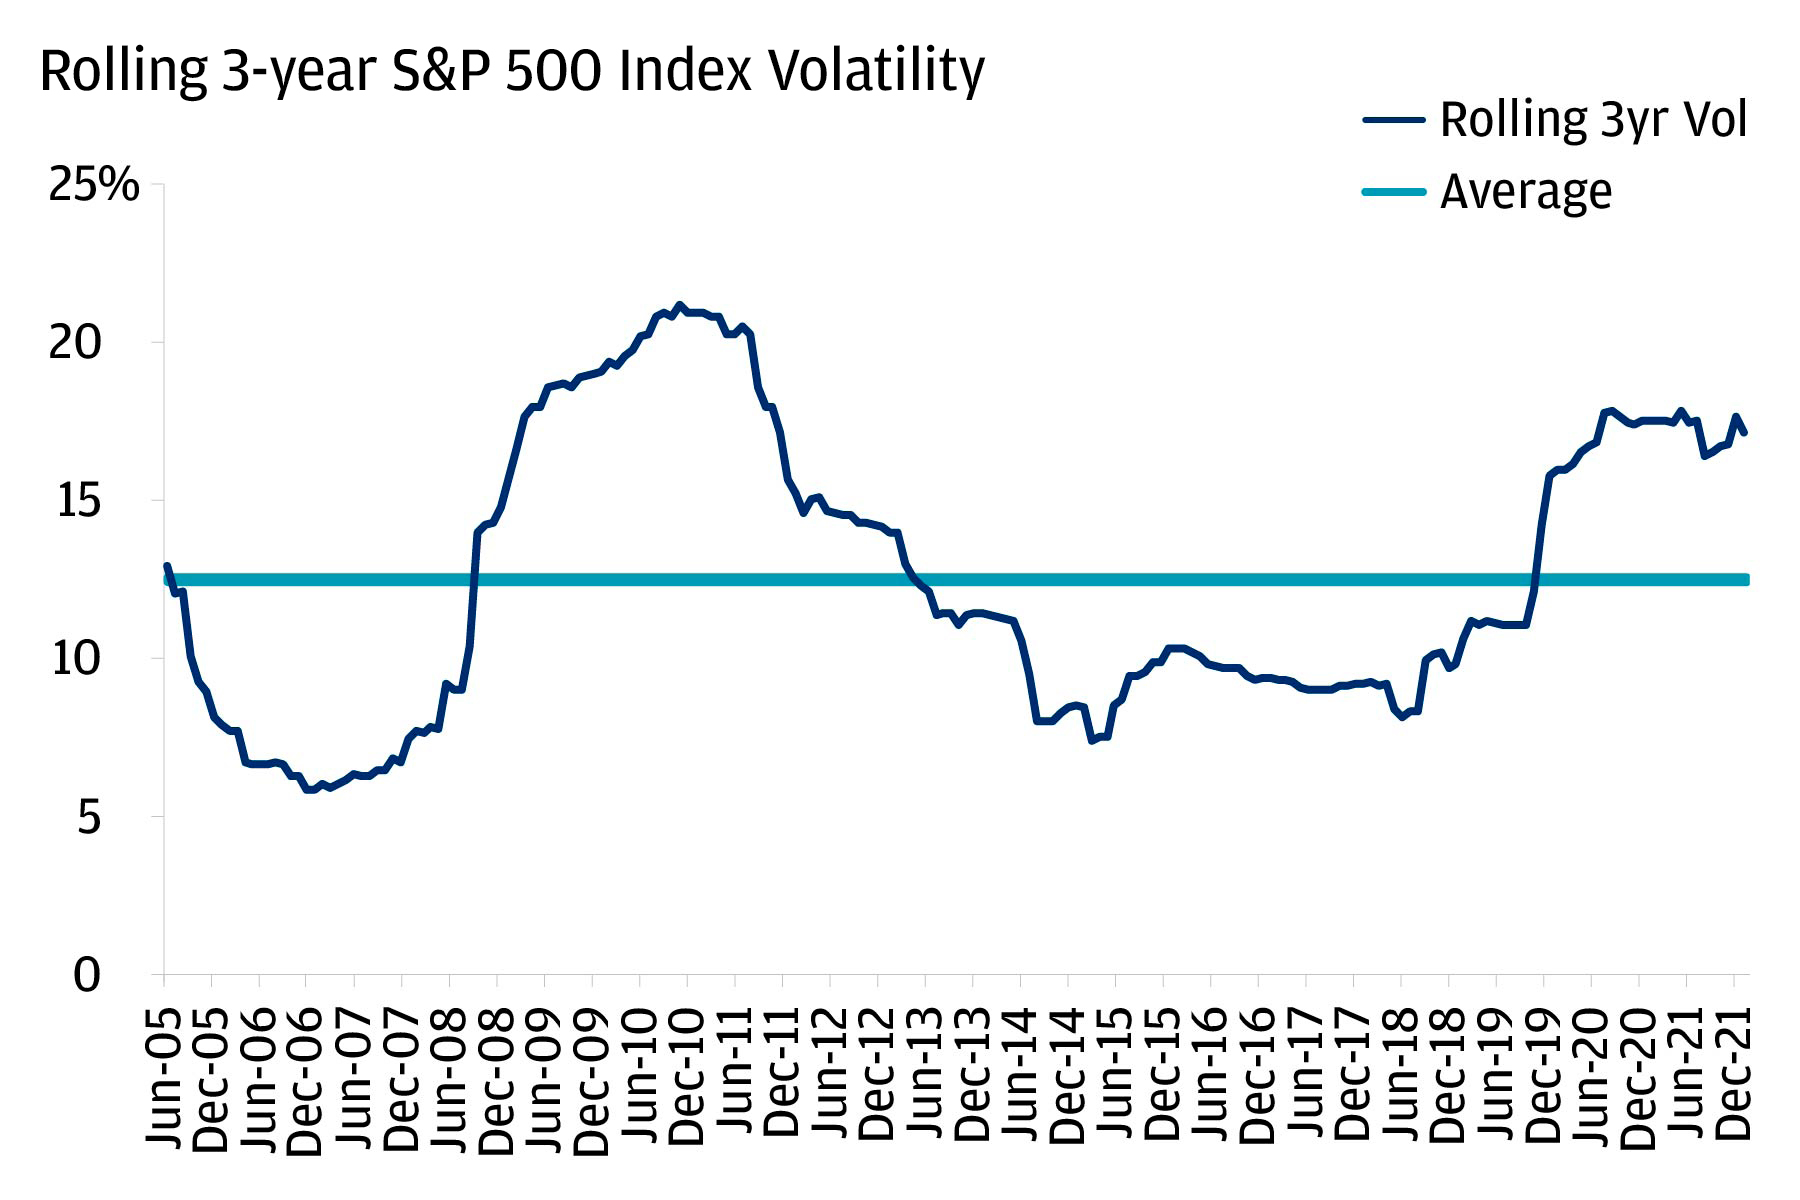 Line chart of rolling three-year S&P 500 Index volatility since 2005, along with the average during that time period – showing that volatility has spiked in the recent past.